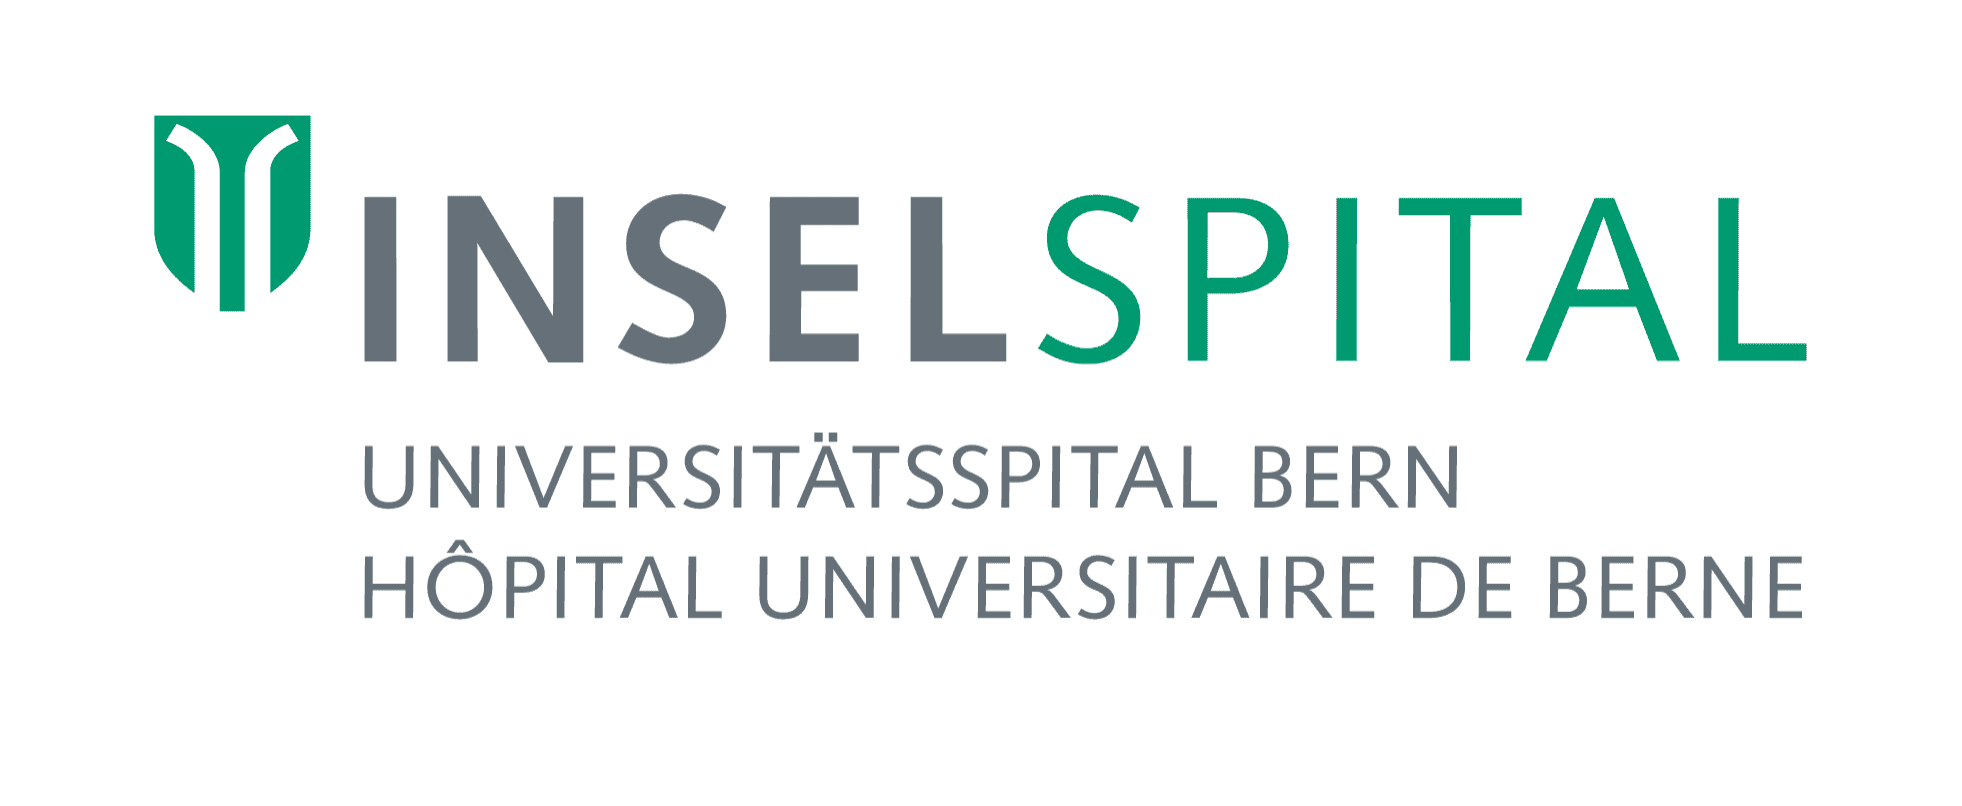 INSELSPITAL